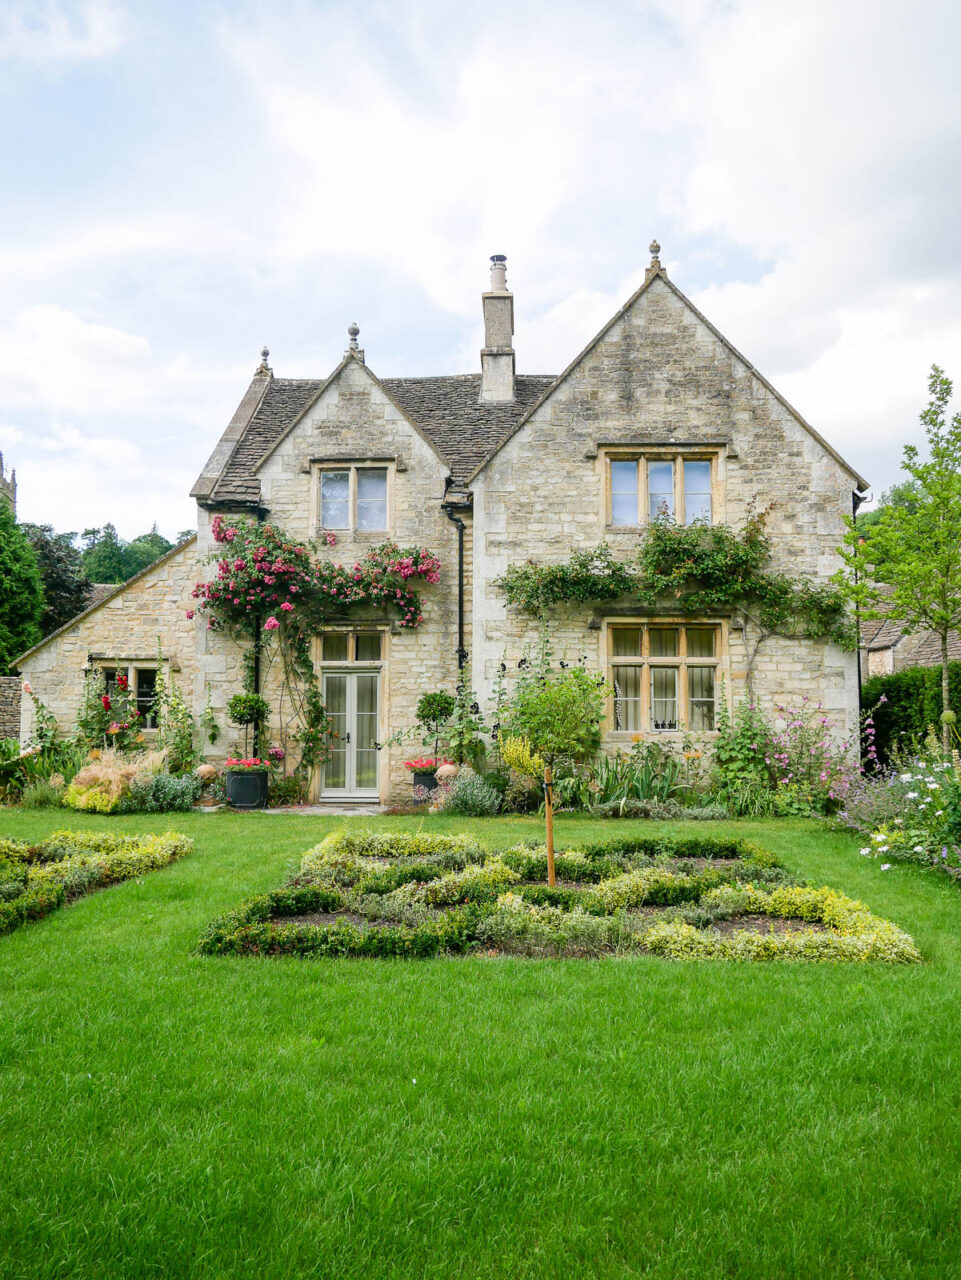 Pretty house in the Cotswolds